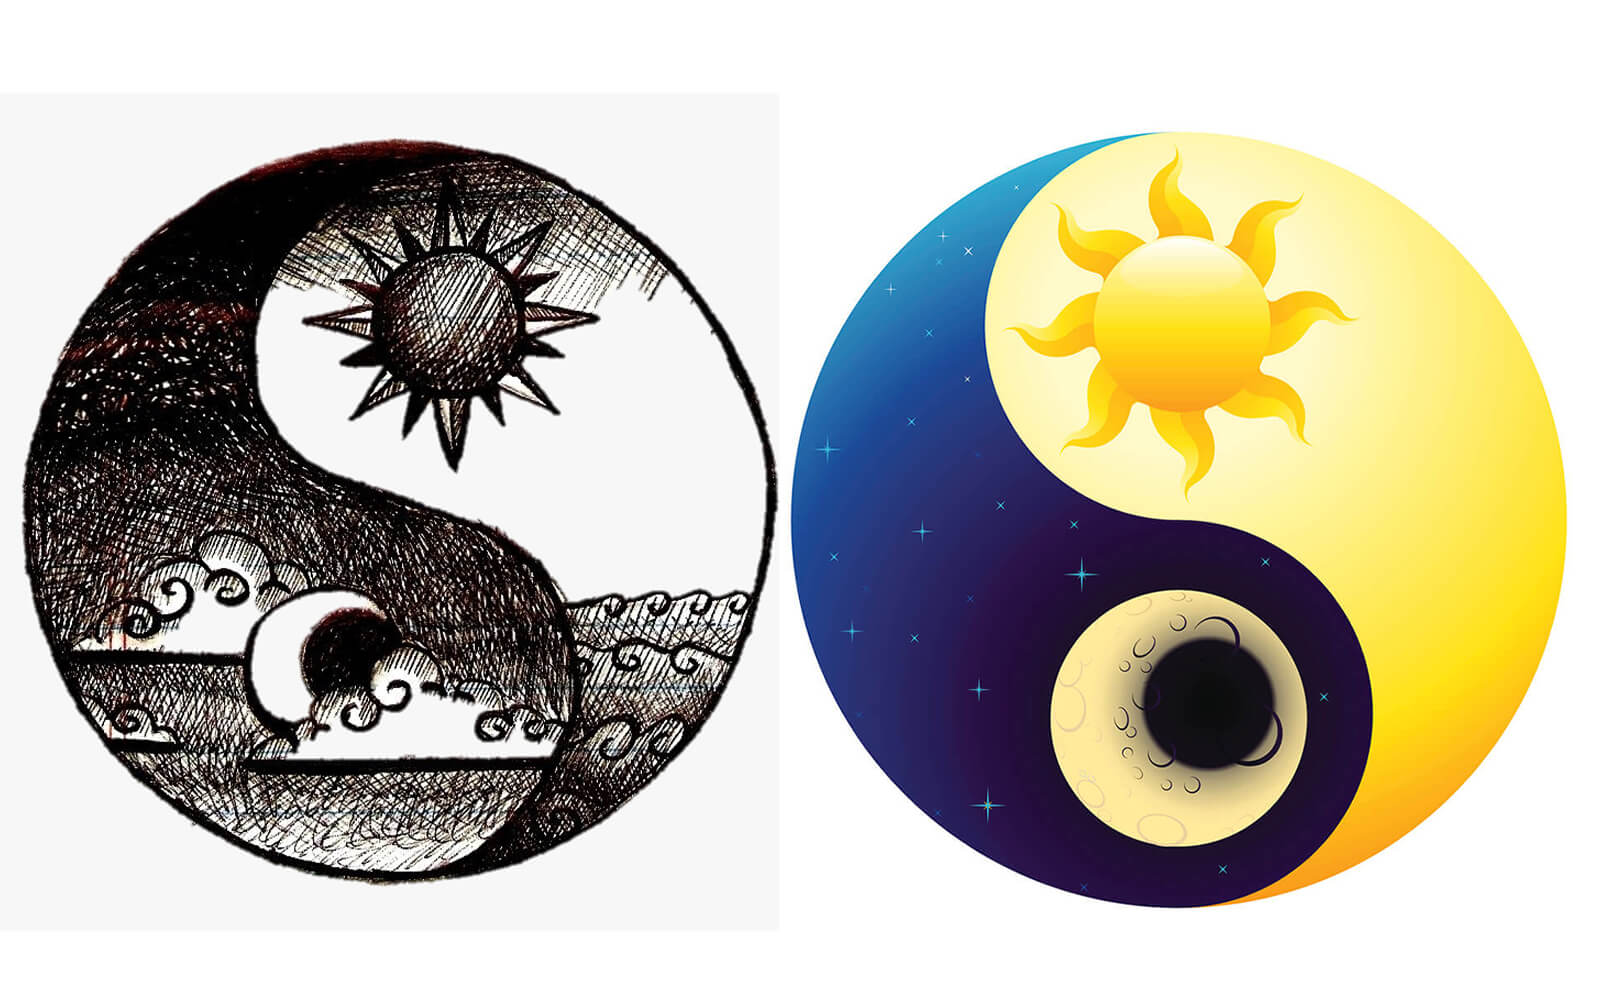 The Concept of Yin and Yang - The Yin and Yang Story and History